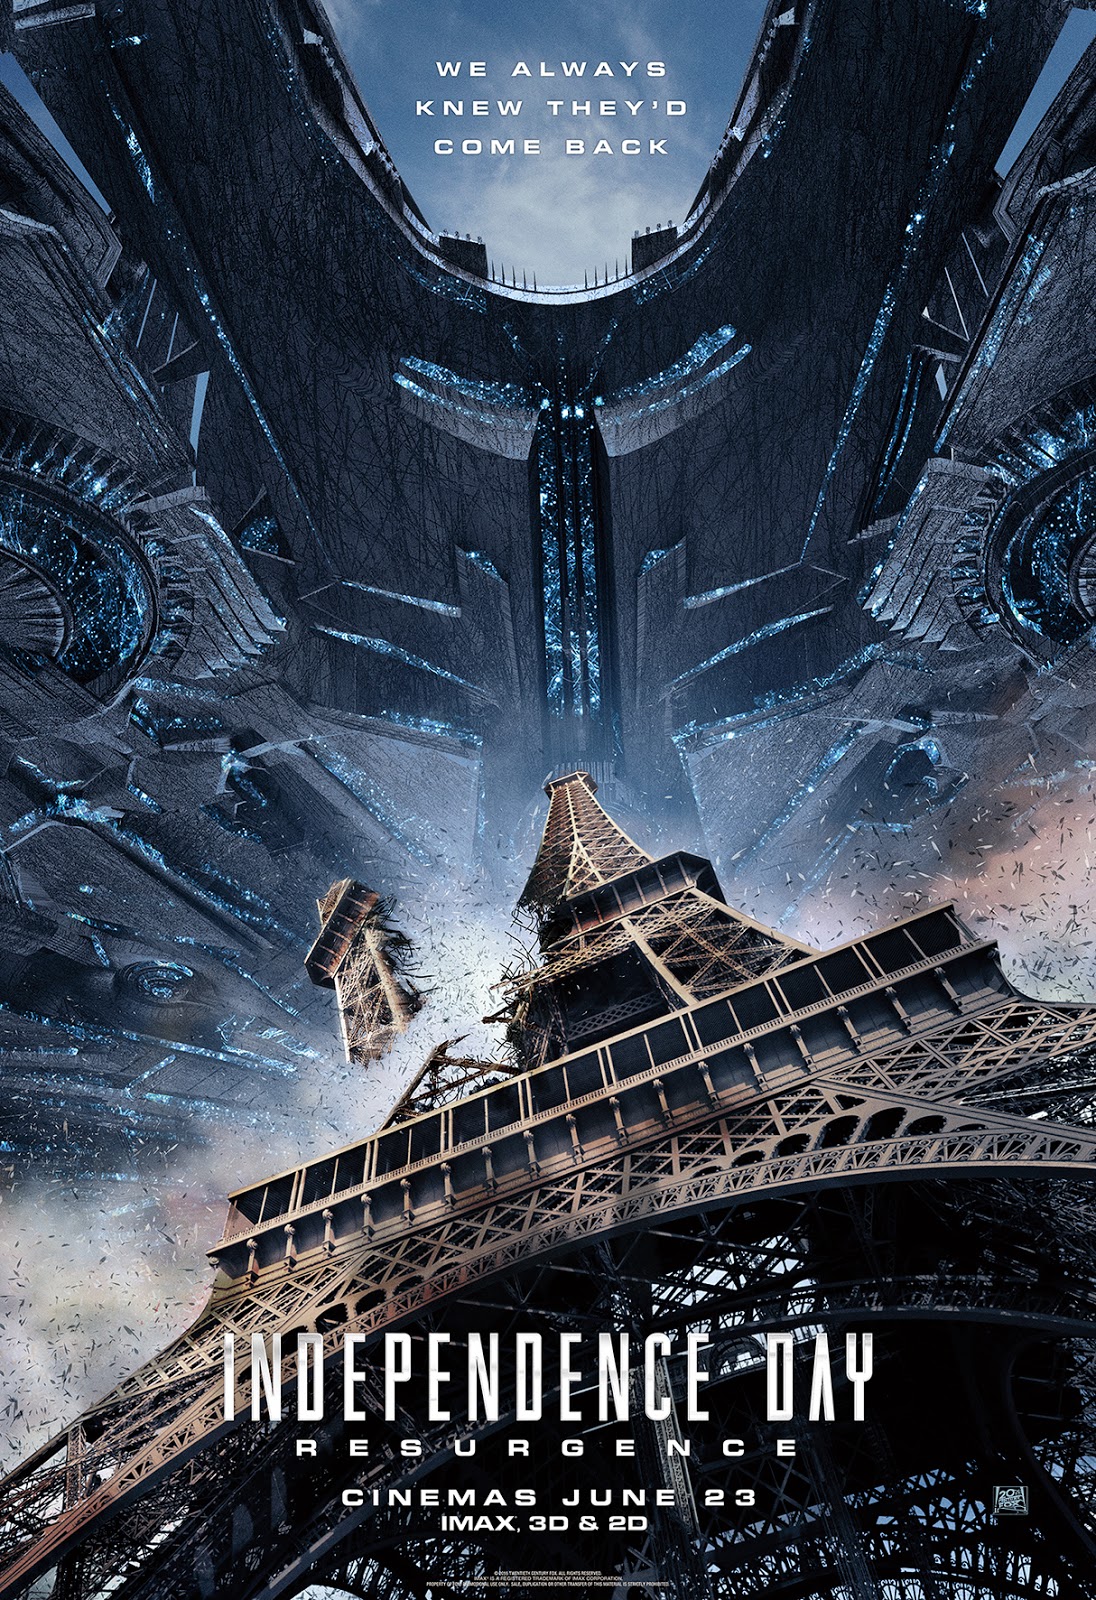 Independence Day: Resurgence - Movie Review - Film Geek Guy